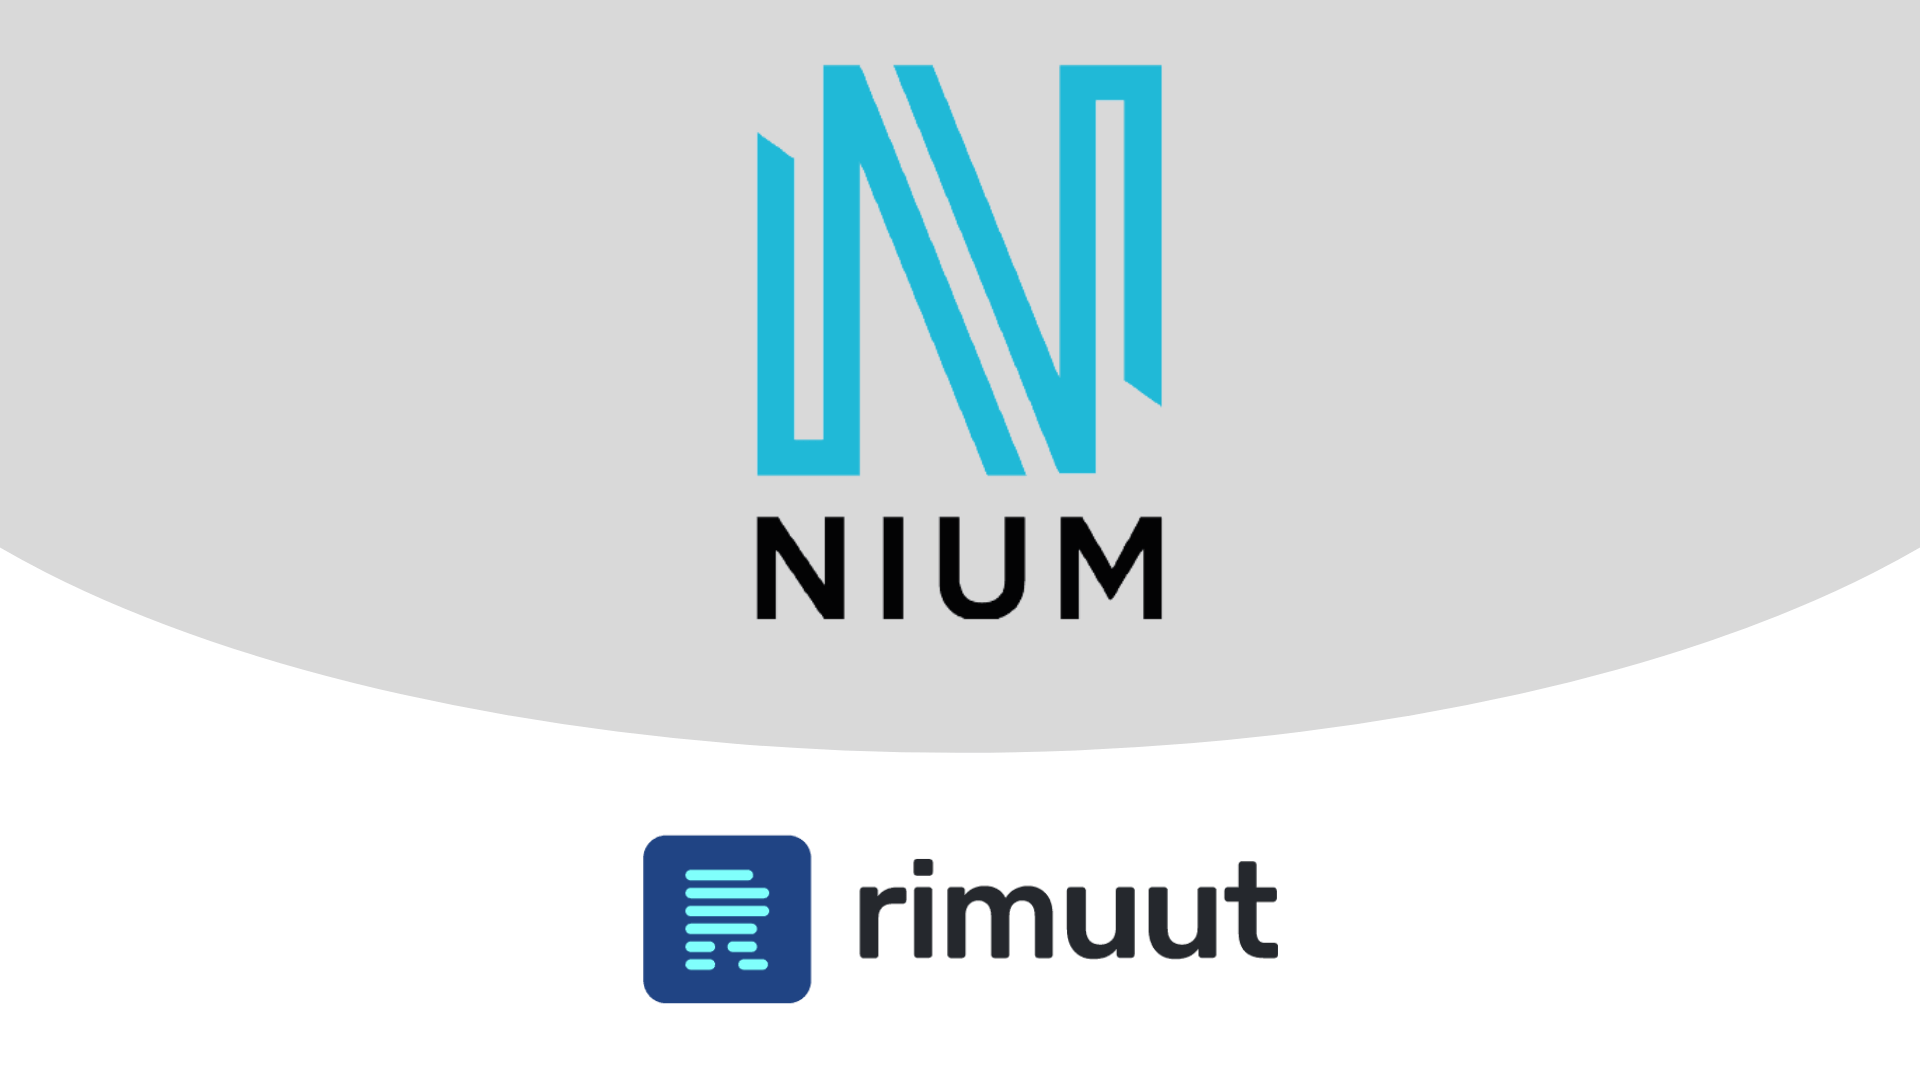 Rimuut partners with Nium to enable seamless international payment